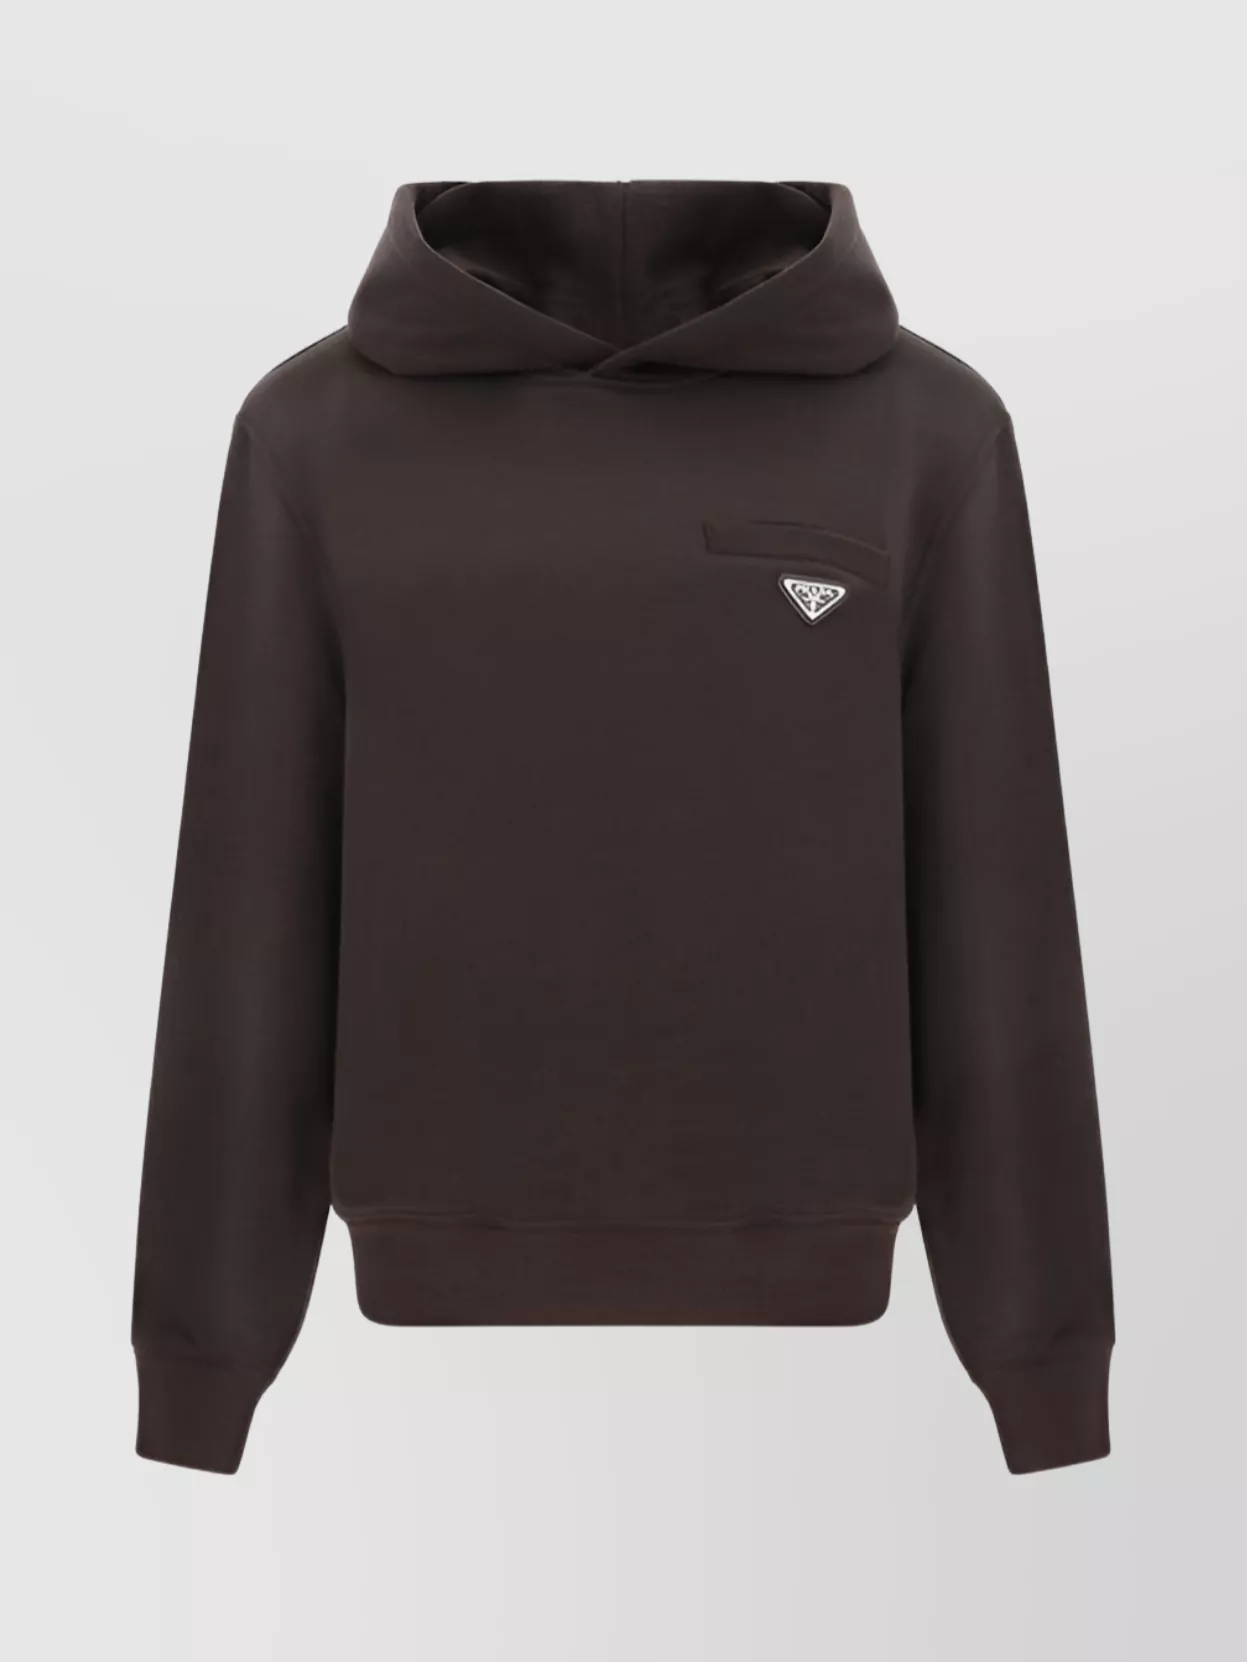 Prada Cotton Hoodie With Front Slit Pocket In Brown